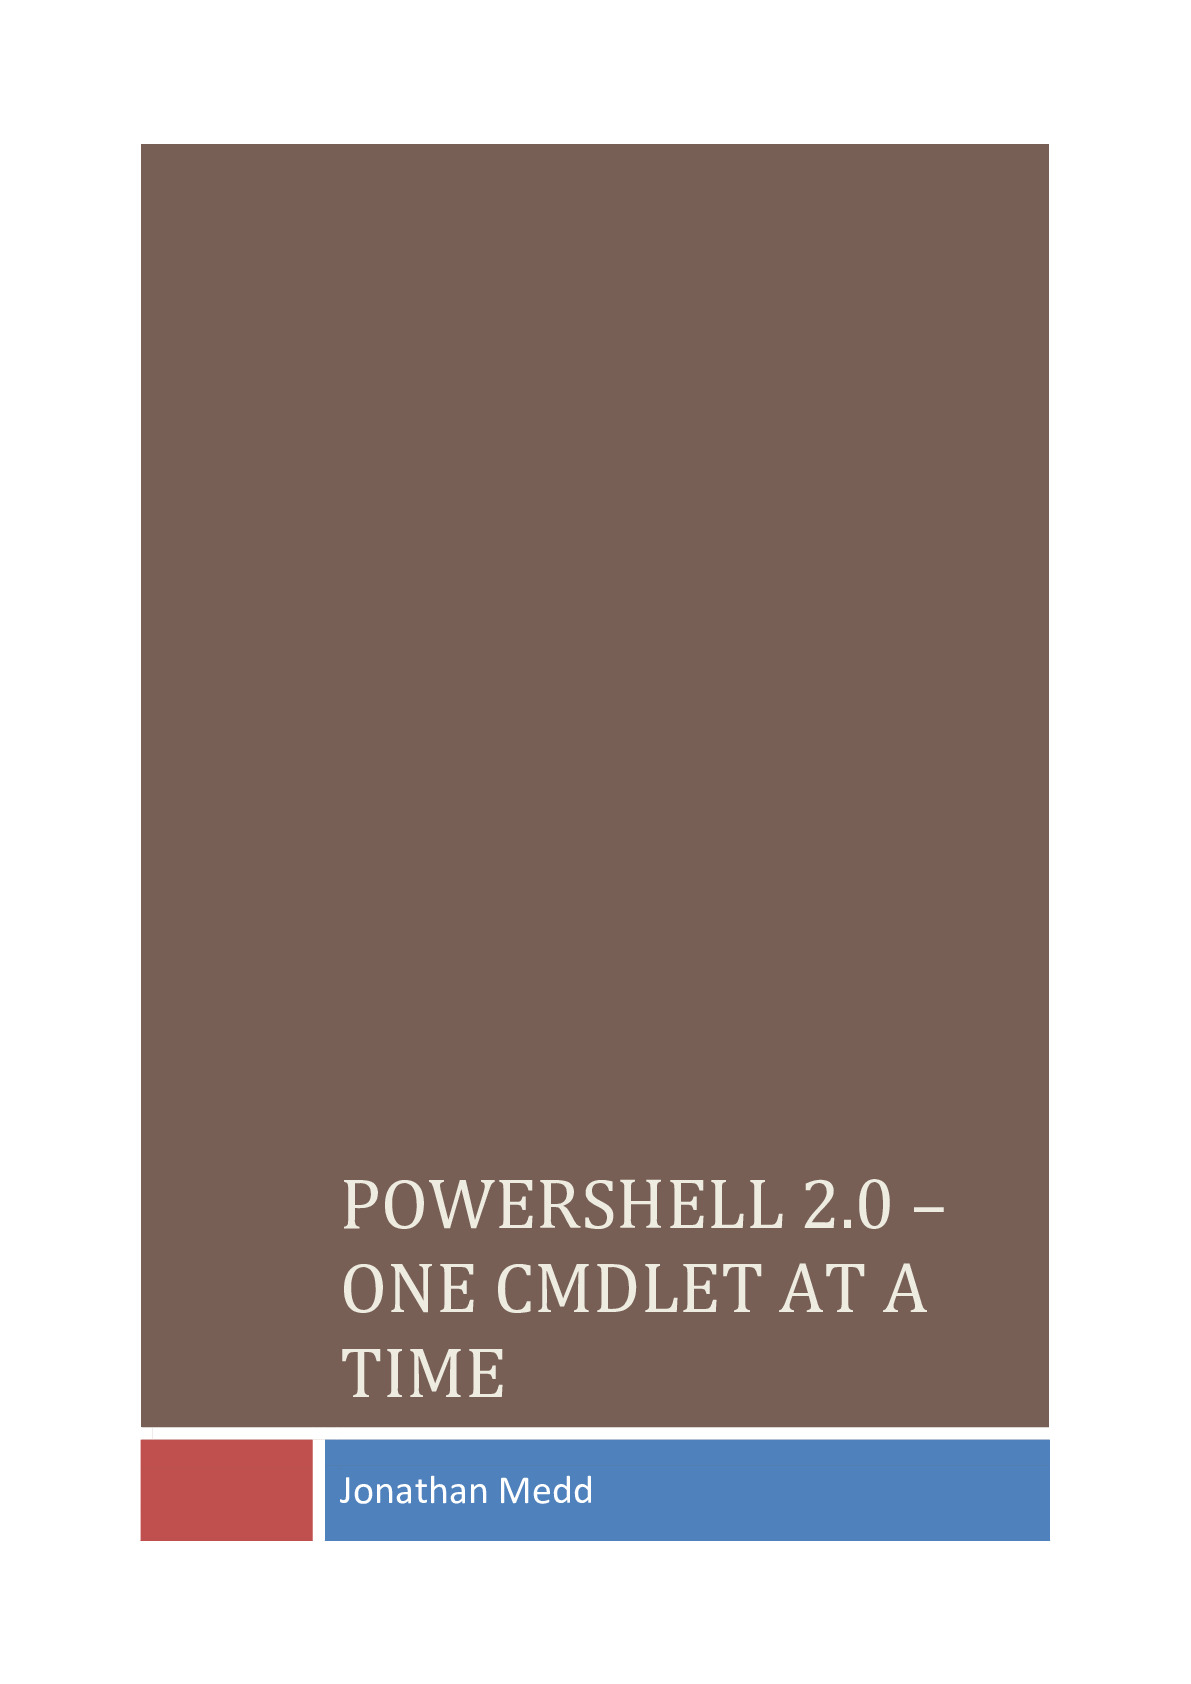 PowerShell_2_One_Cmdlet_at_a_Time